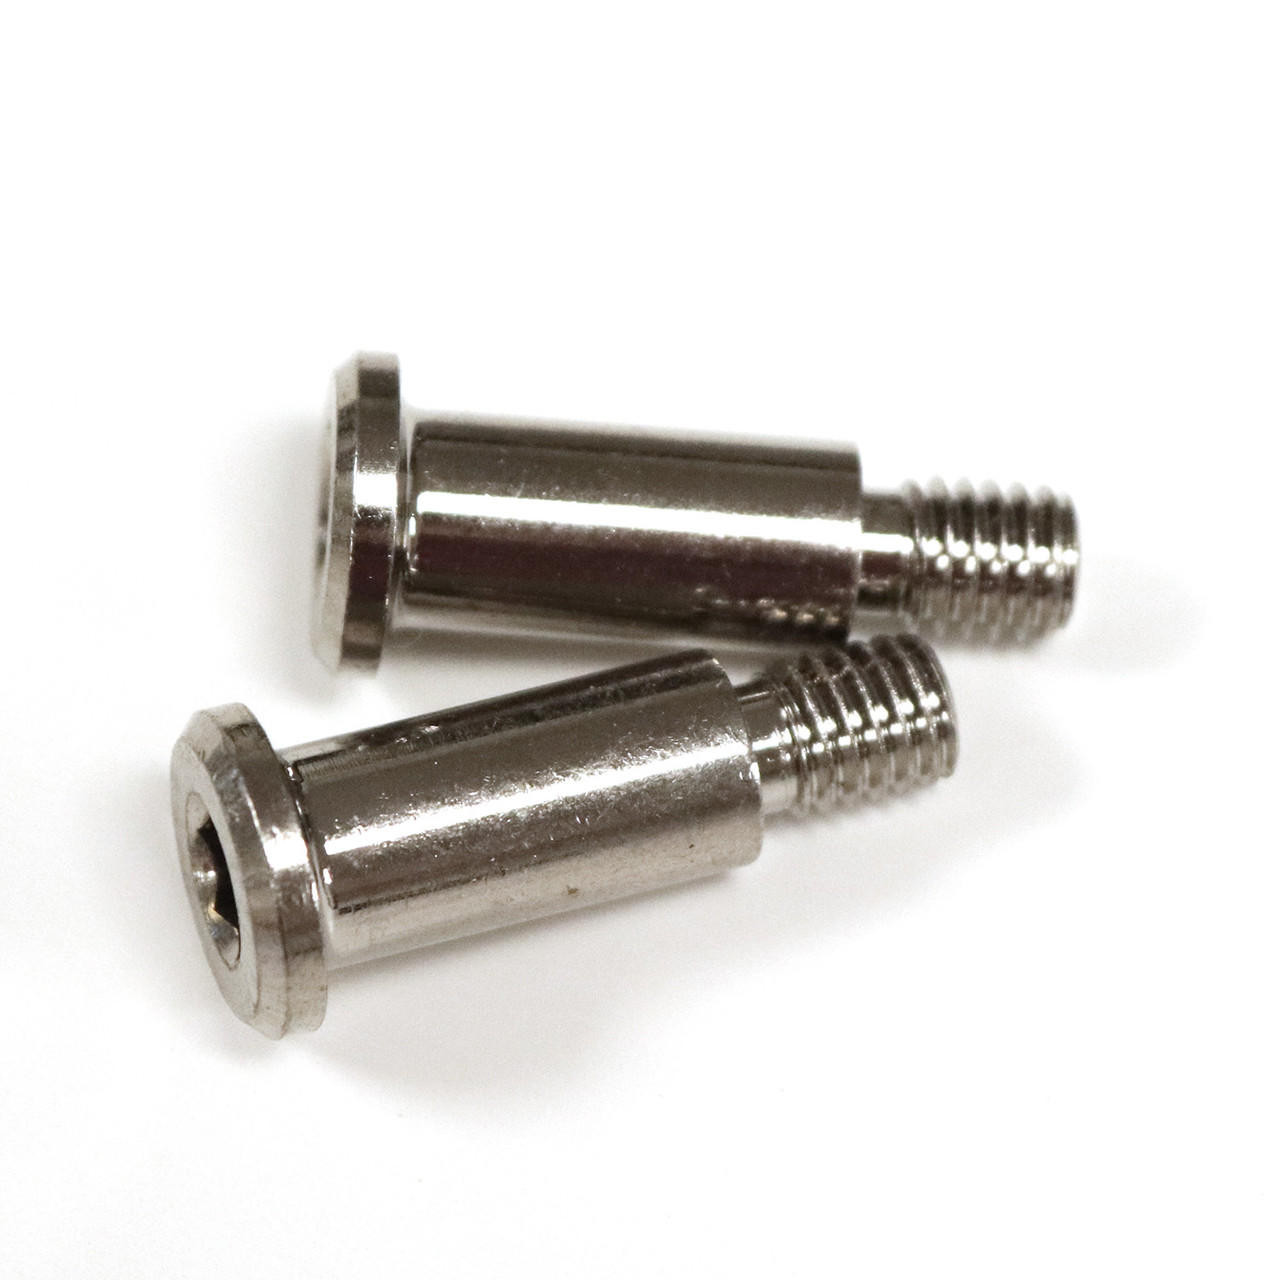 A-dec / W&H Standoff Screw for A-dec 300 400 and 500 Delivery System - R -  4926373R